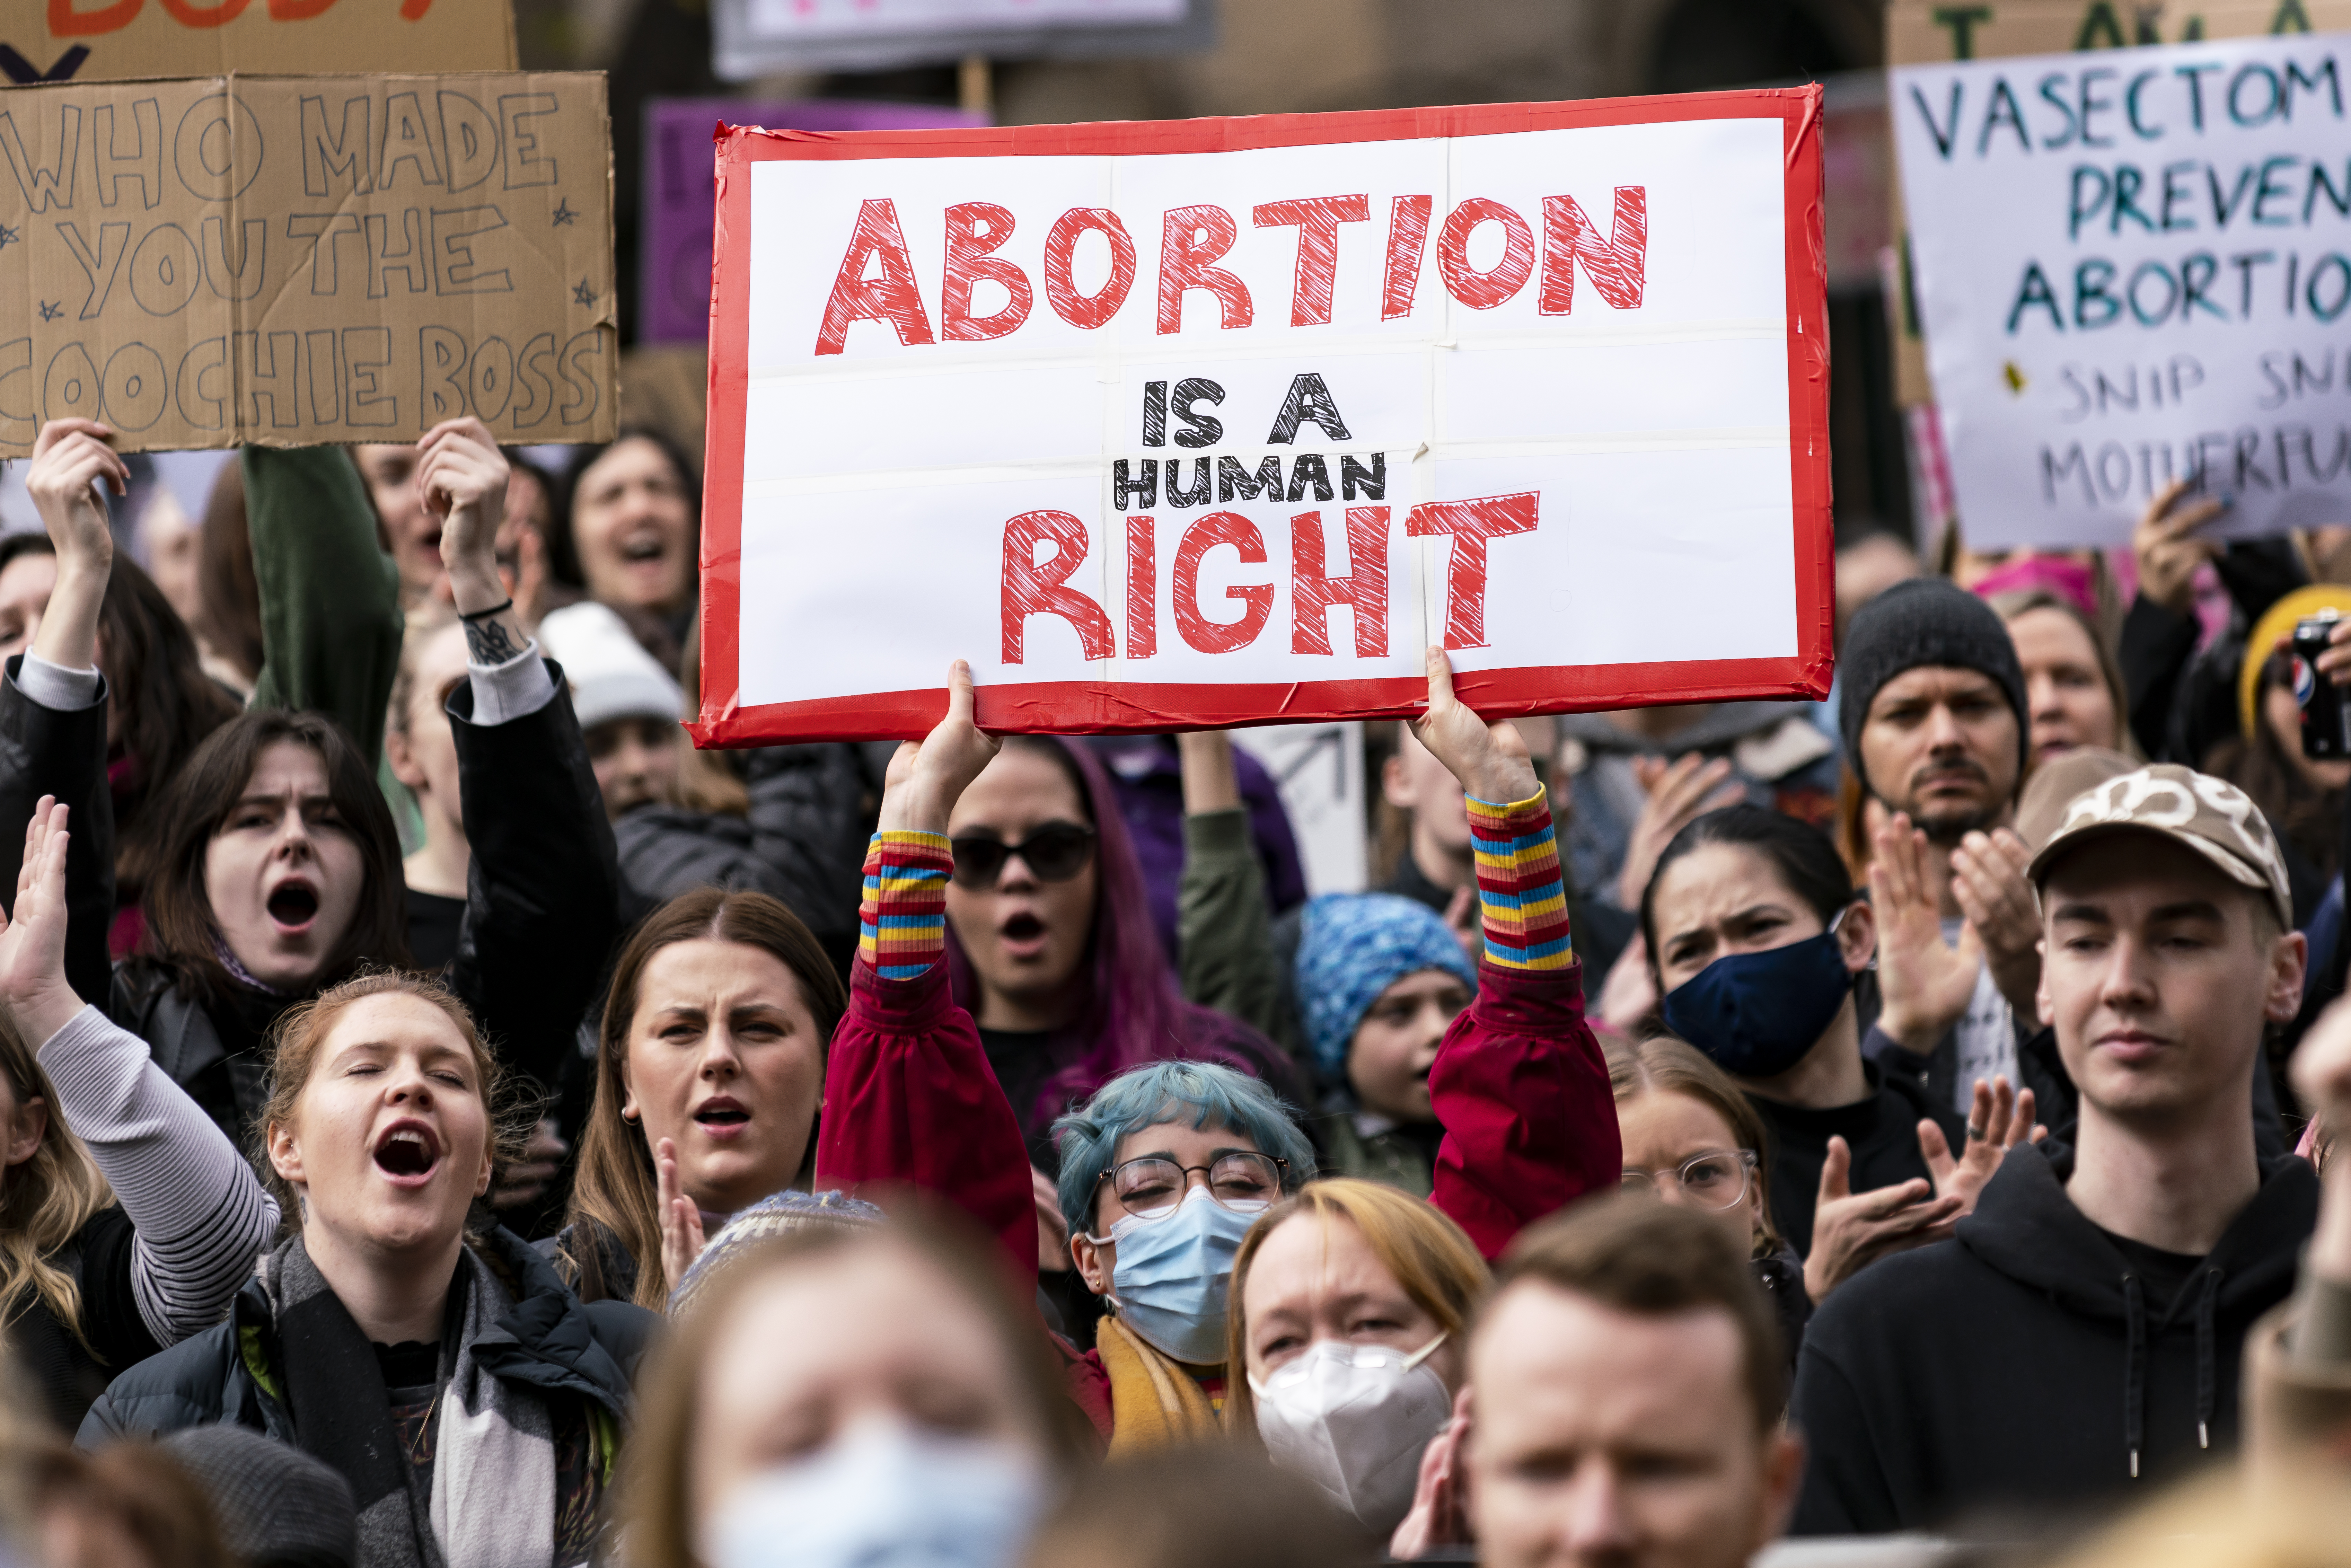 "Roe v Wade OVERTURNED: Protest to defend US Abortion Rights (Melb)" by Matt Hrkac, available at https://www.flickr.com/photos/matthrkac/52188391144/. Licensed under Attribution 2.0 Generic (CC BY 2.0).